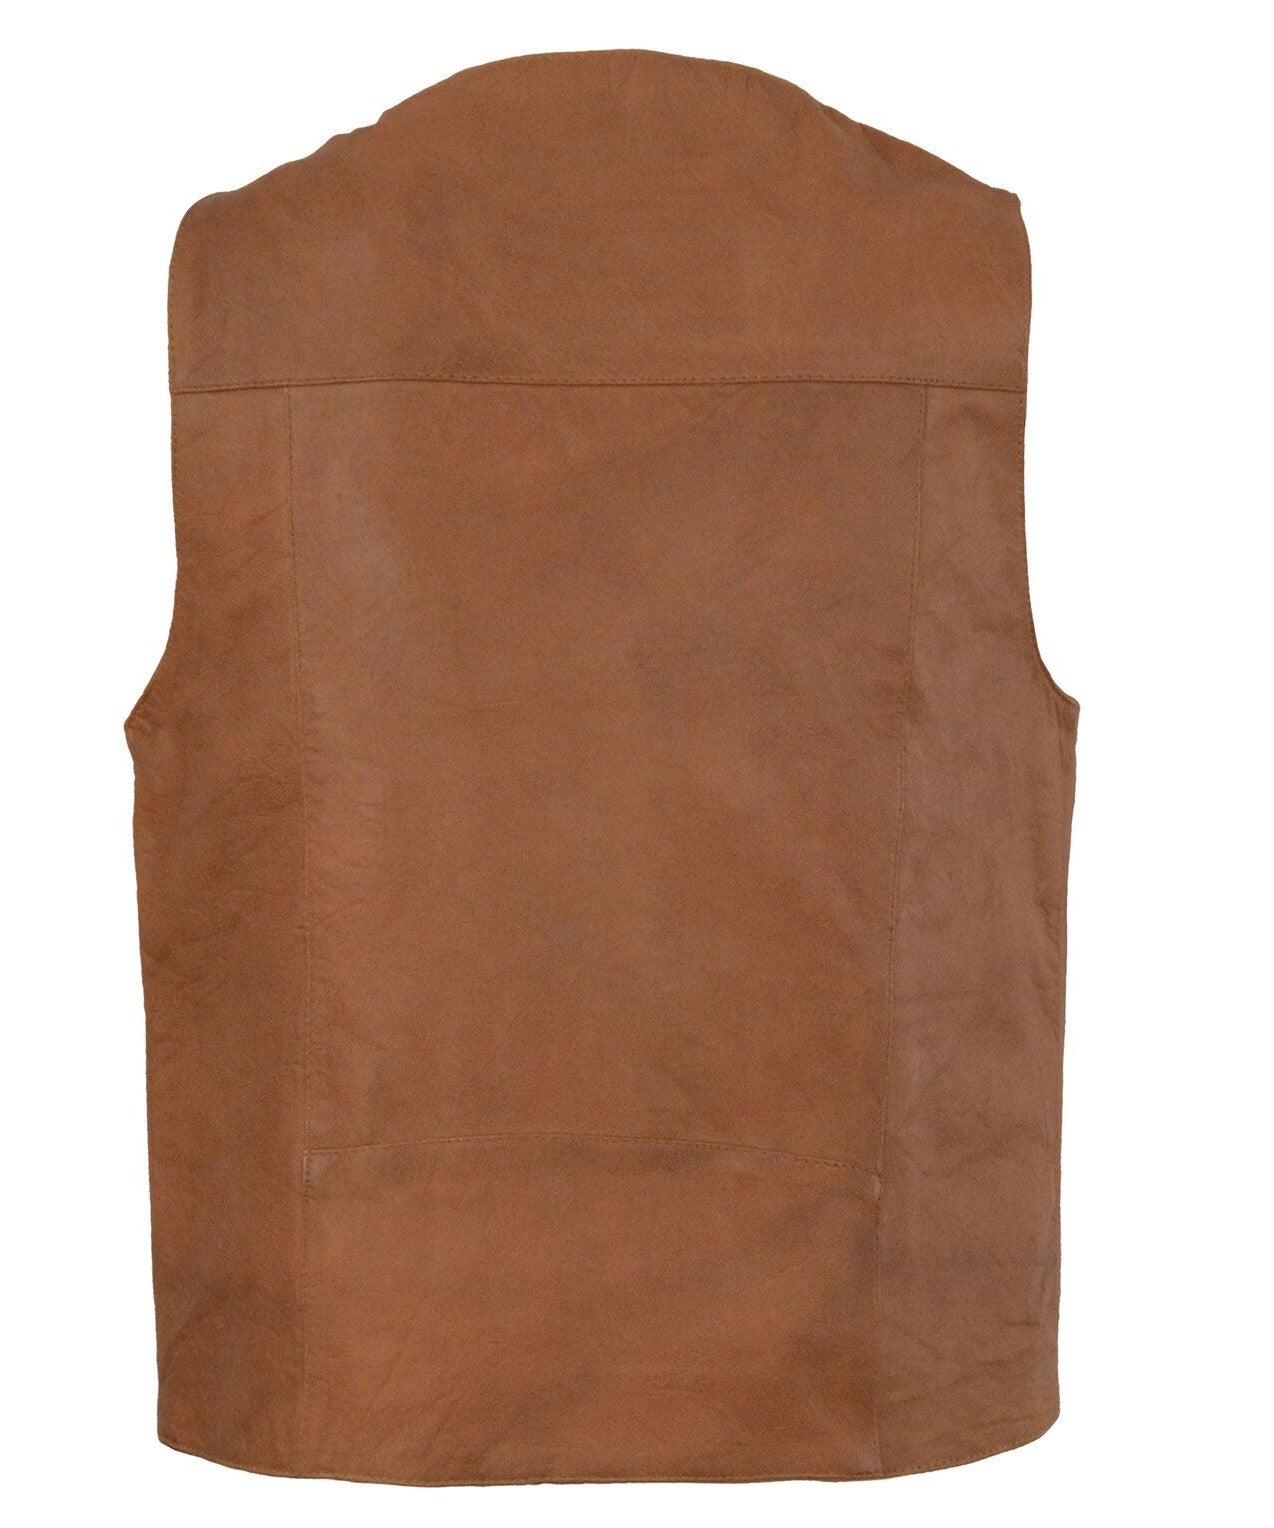 back view of Western style brown leather vest has v-neck and  snap front. It is made from soft cowhide with slightly distressed look.  It has 2 horizontal outside front lower pockets and conceal carry pockets on each inside front, back is stitched panels.  It has a mesh lining. Available for purchase in our shop in Smyrna, TN just outside of Nashville. Available in sizes small through 5x